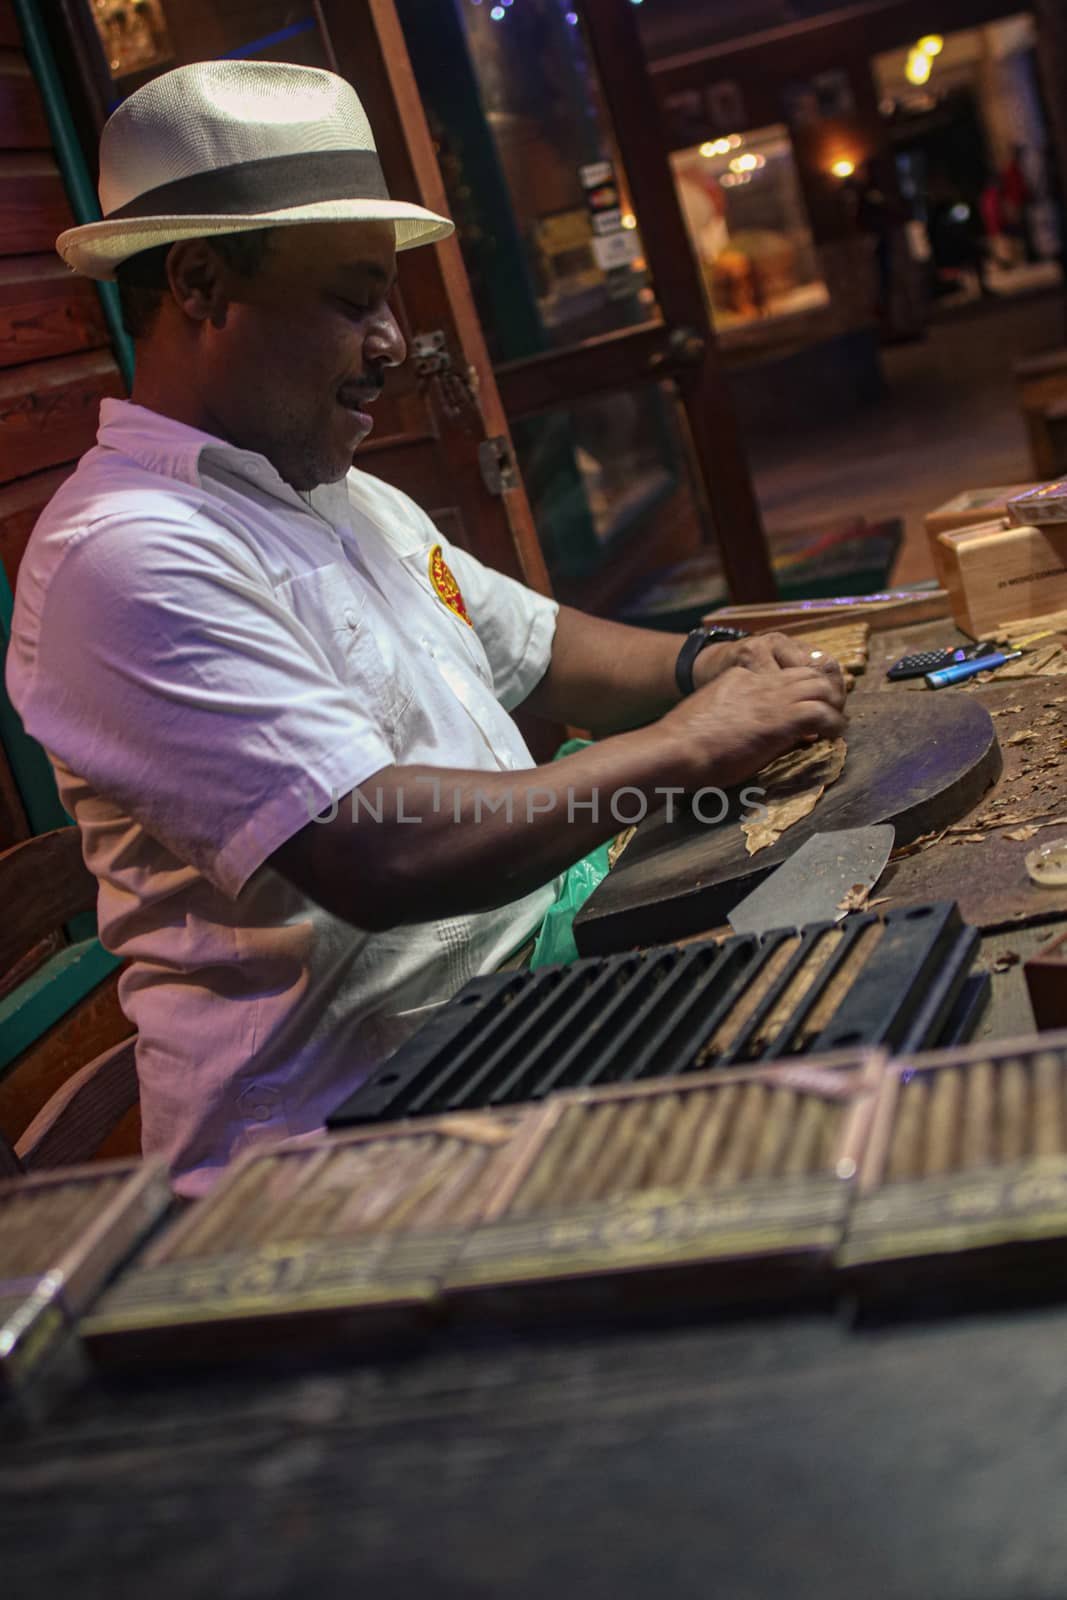 BAYAHIBE, DOMINICAN REPUBLIC 4 JANUARY 2020: Craft production of Dominican cigars